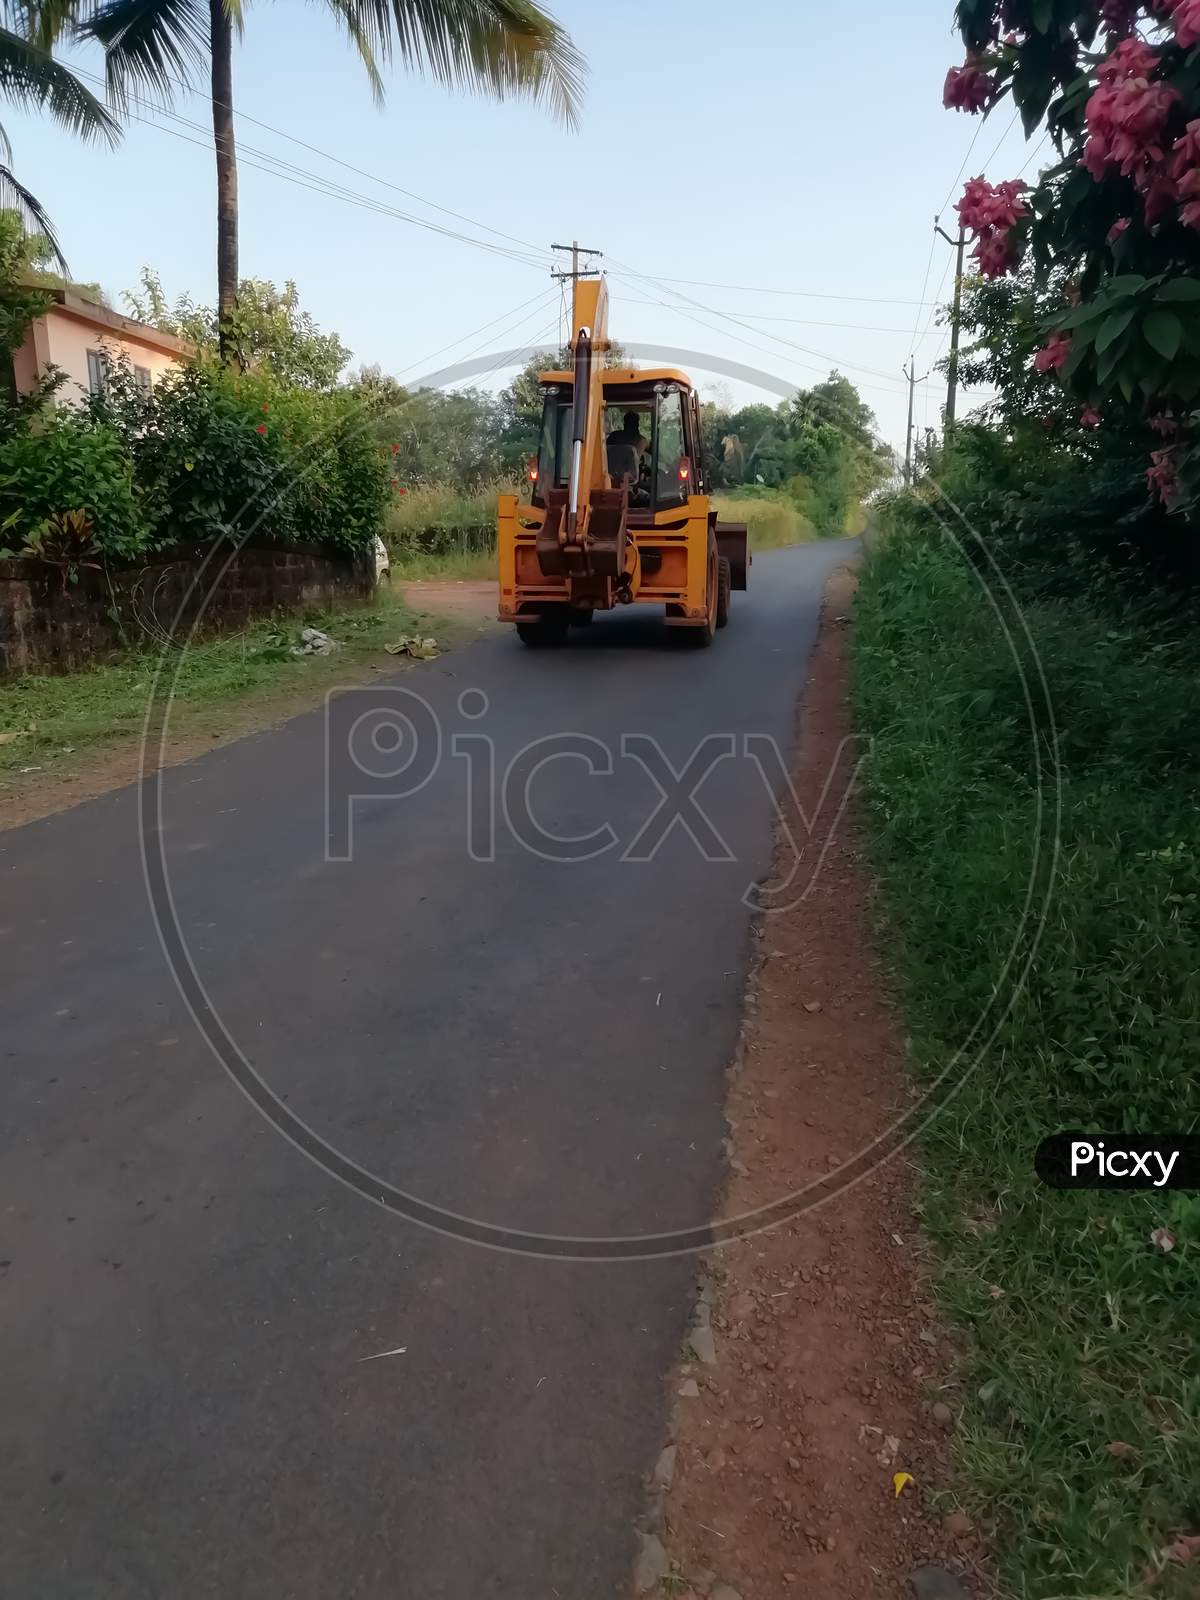 View Of The Street Road With An Earth Mover Vehicle